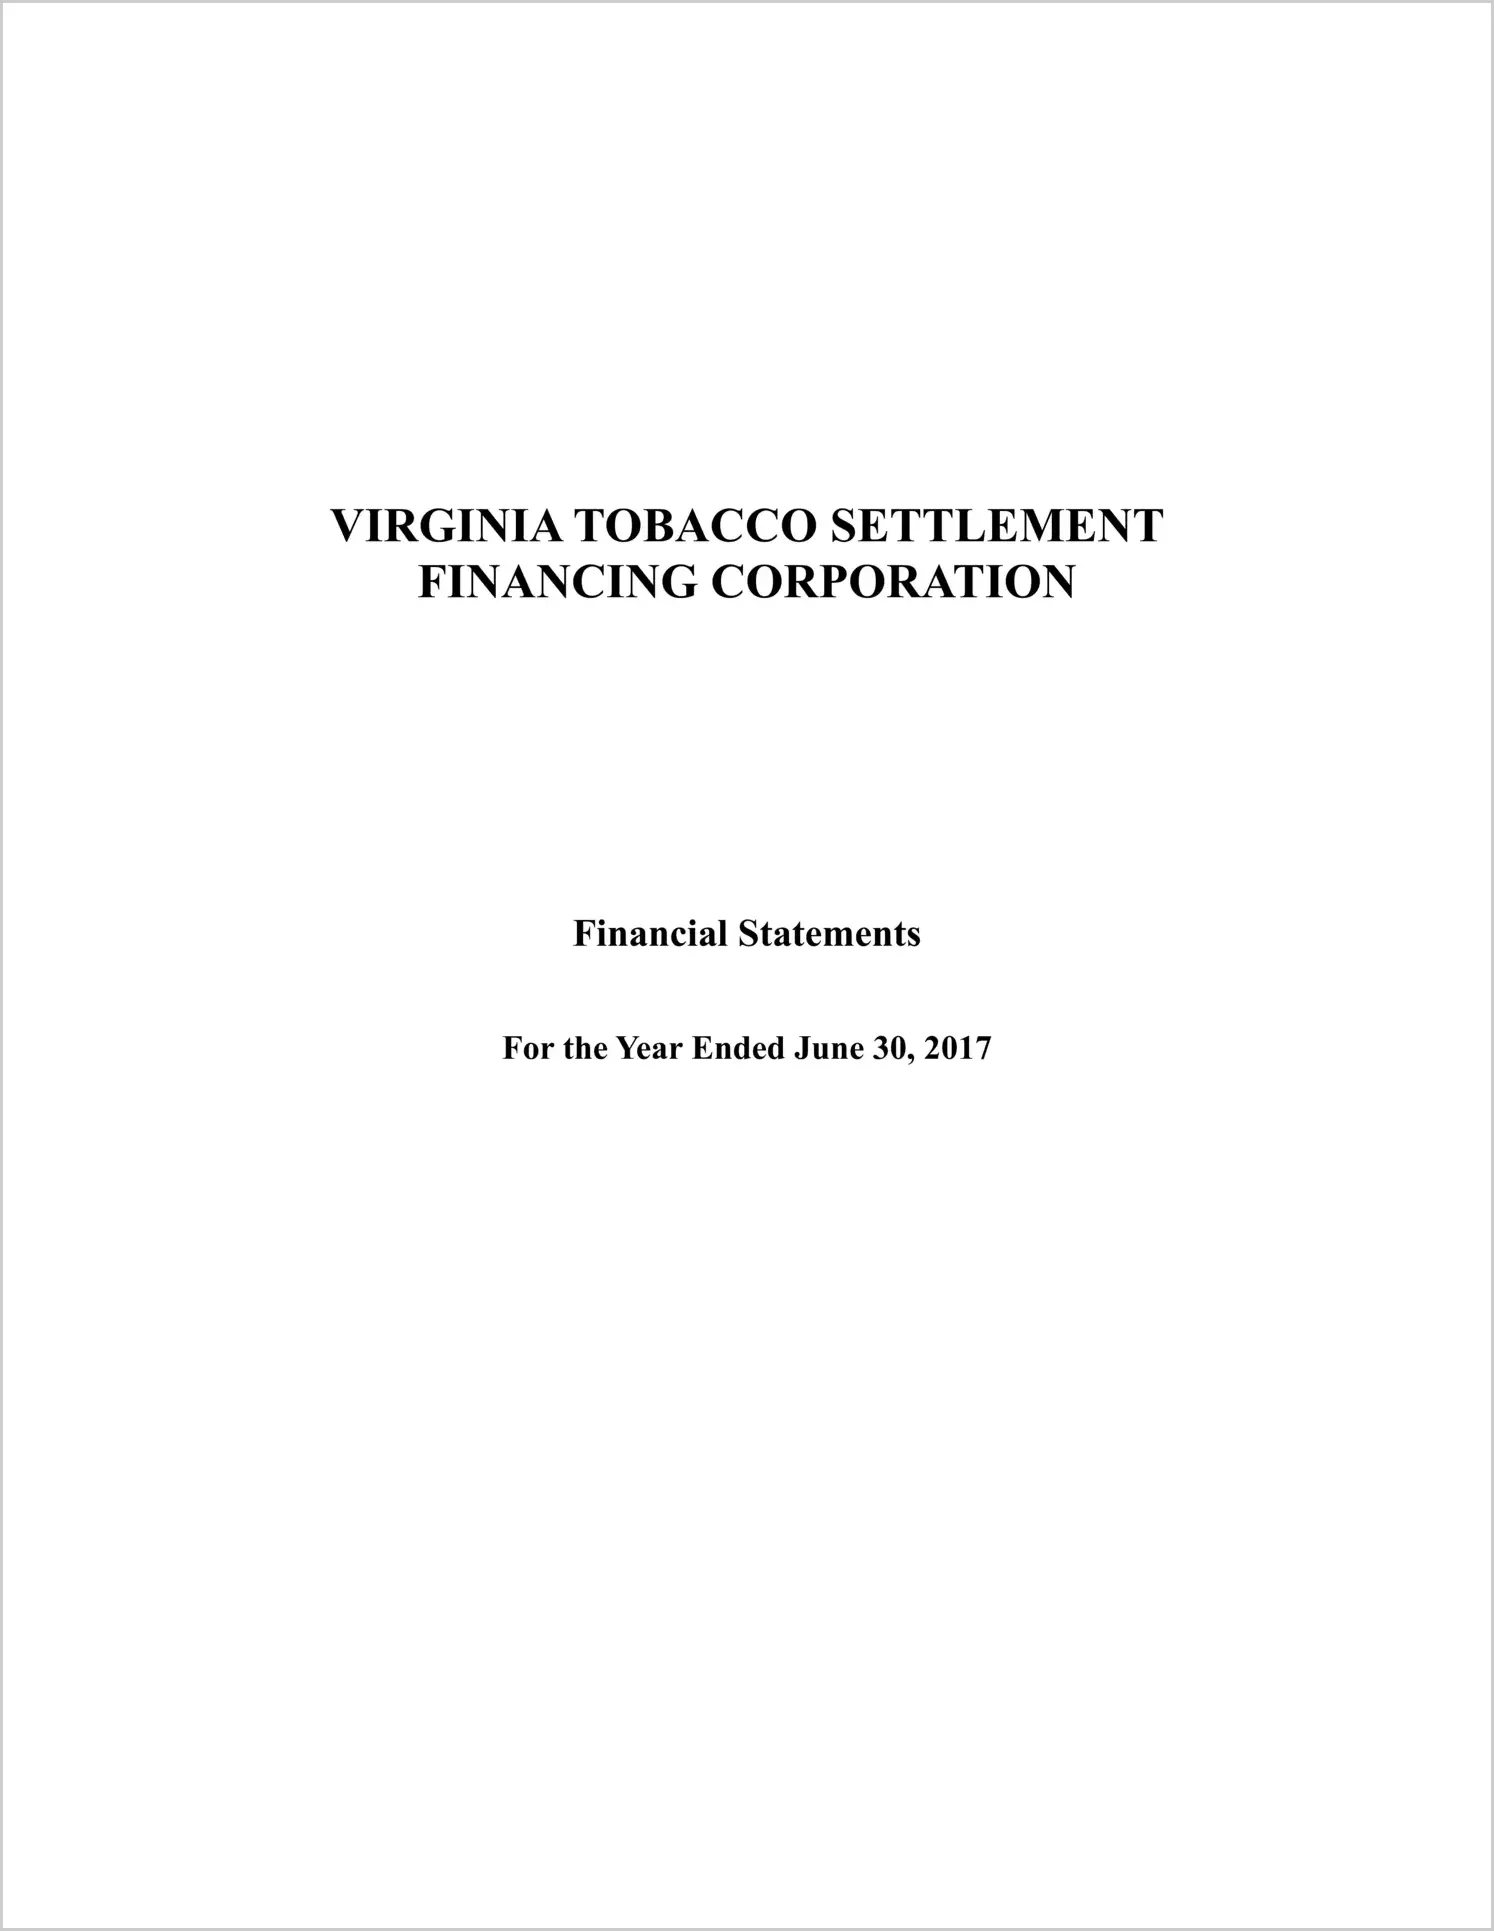 Virginia Tobacco Settlement Financing Corporation for the year ended June 30, 2017